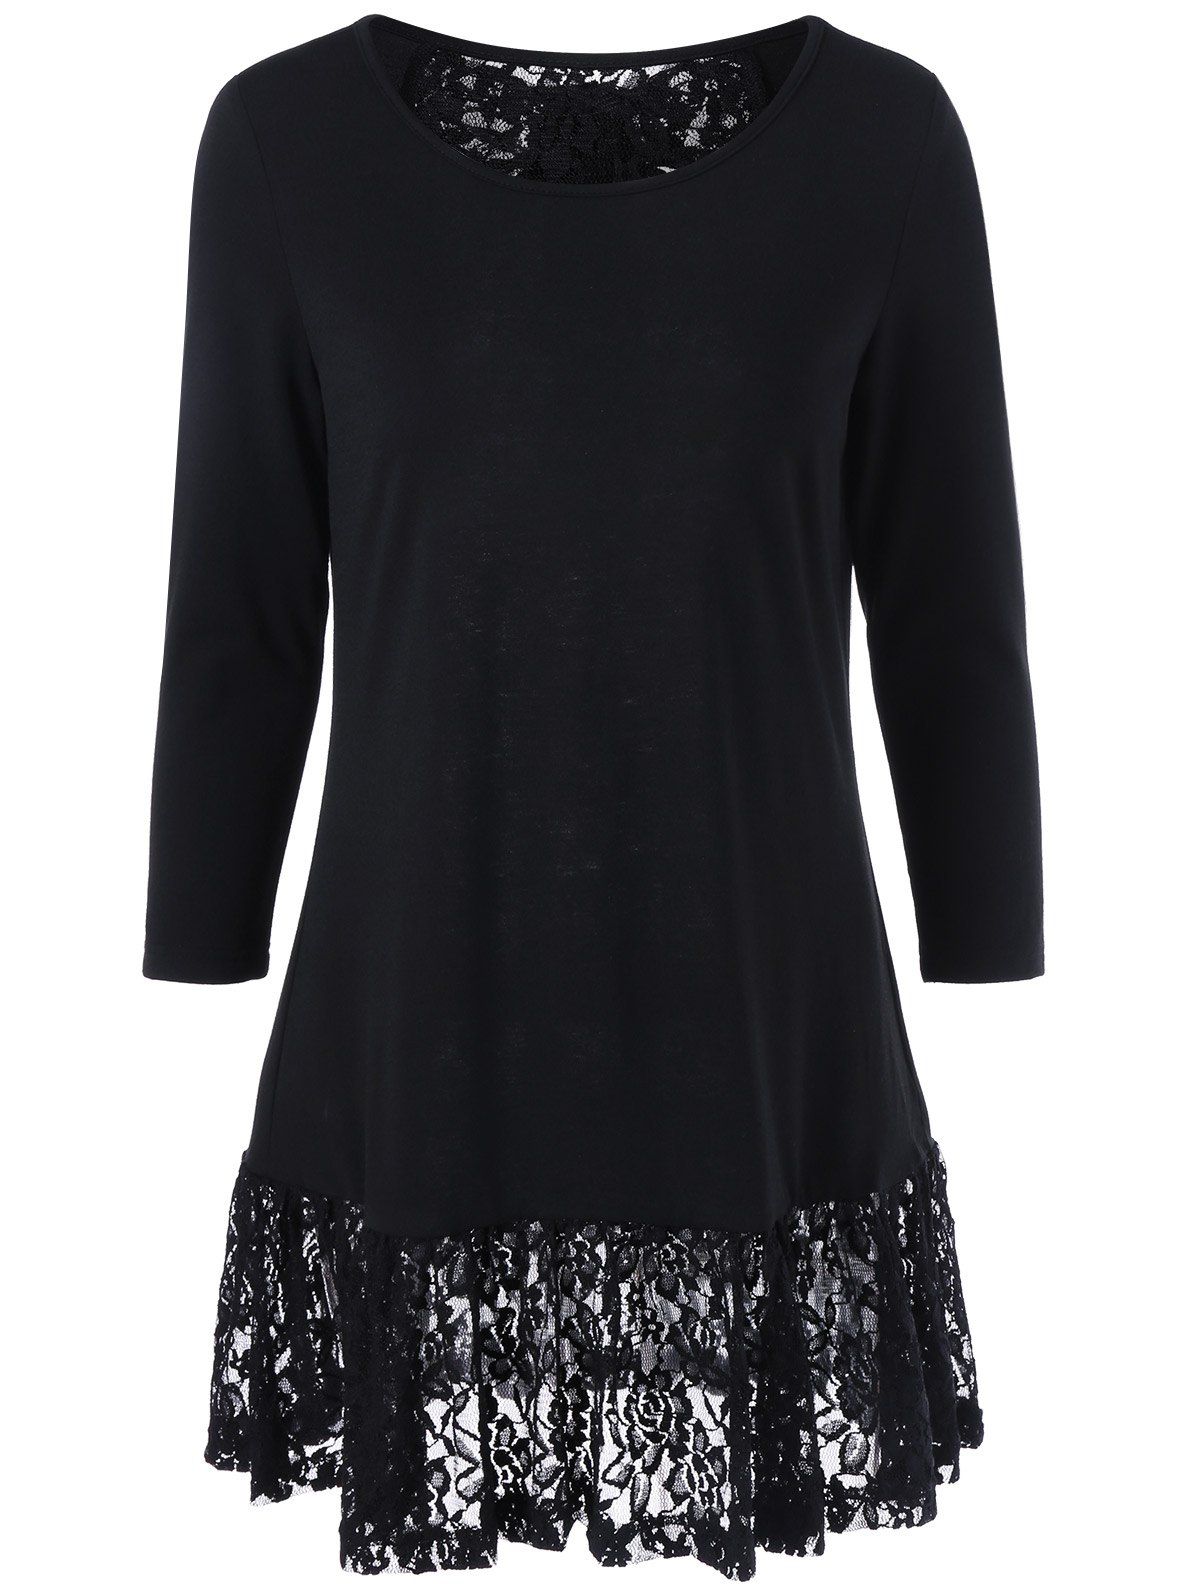 2018 Lace Back Long Sleeve Tunic In Black Xl | Rosegal.com